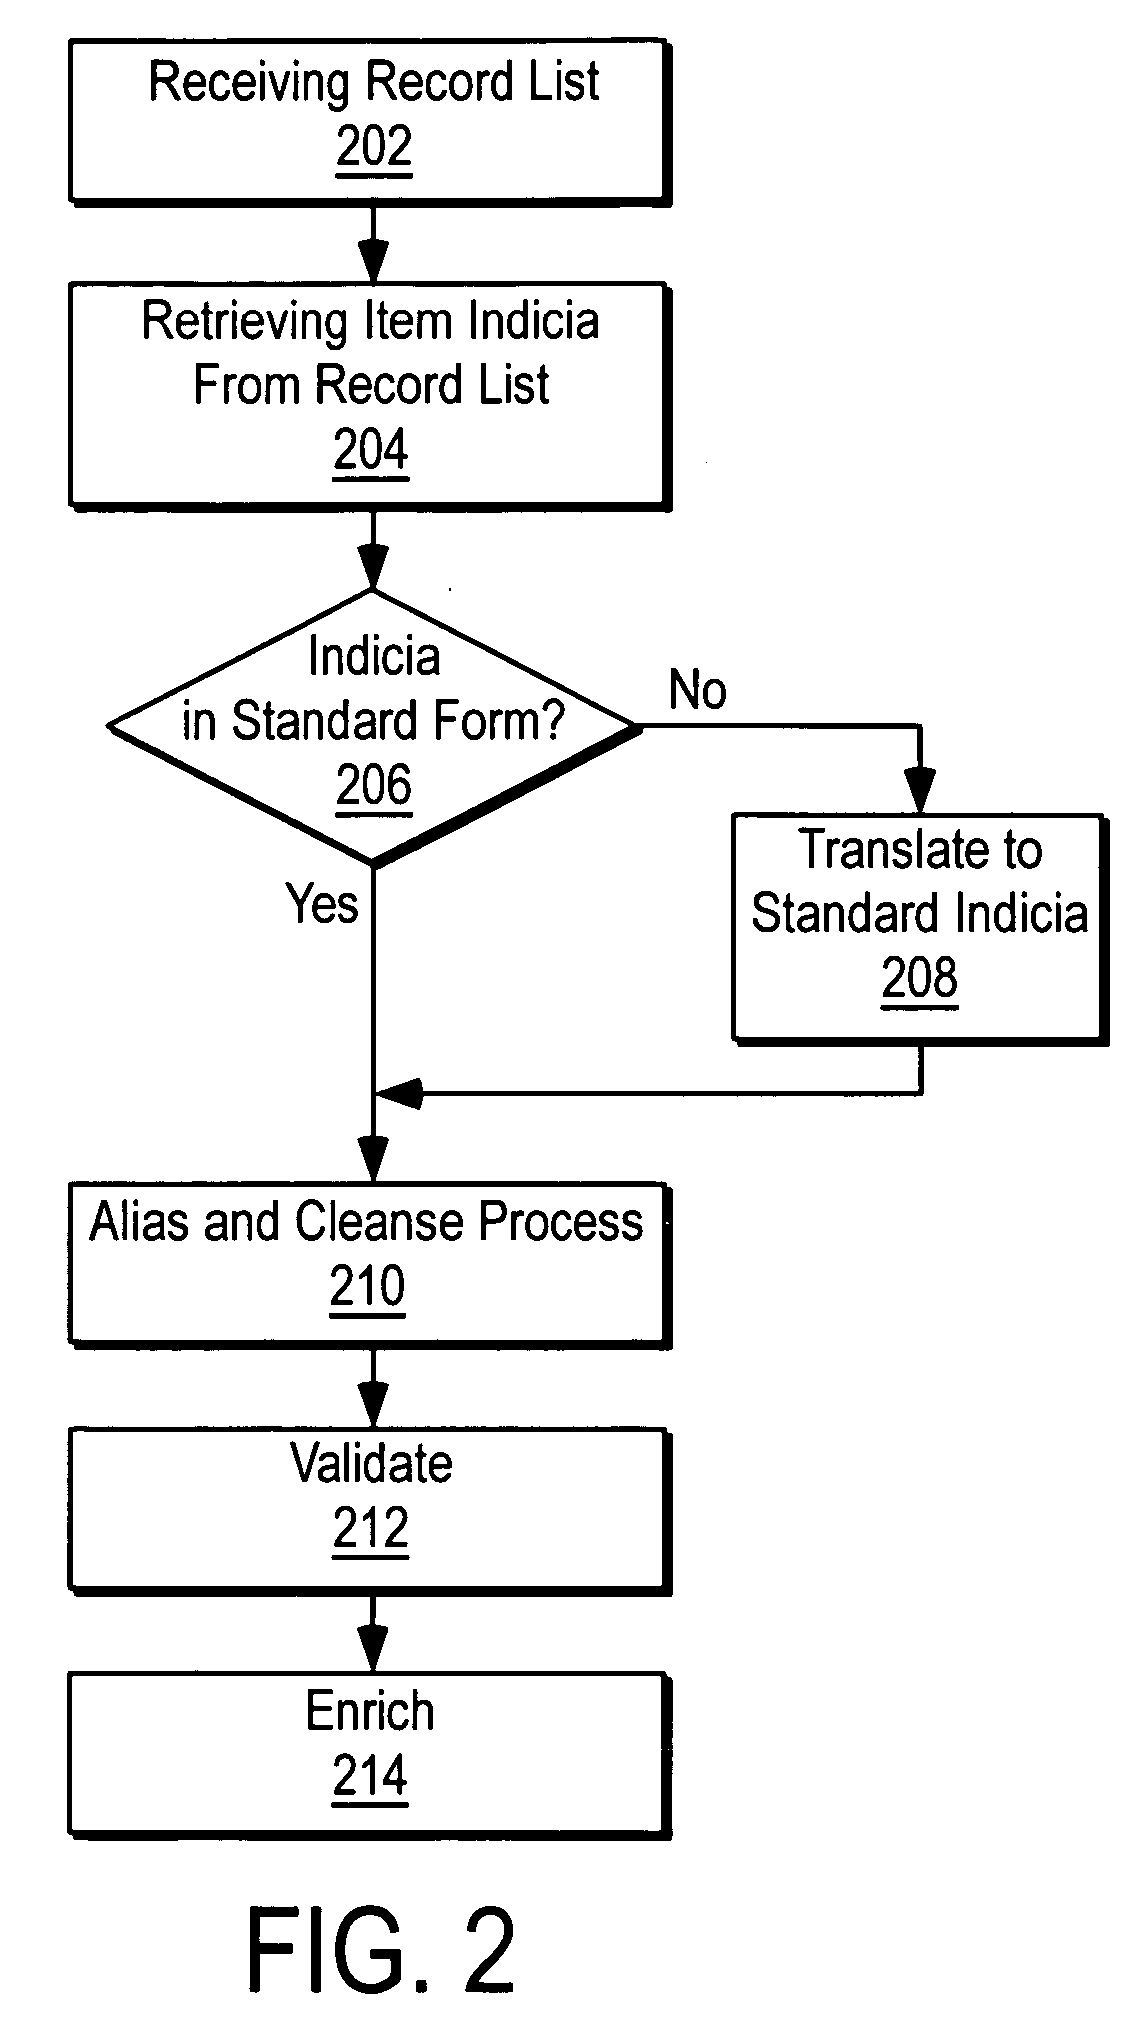 System and method for managing item interchange and identification in an extended enterprise